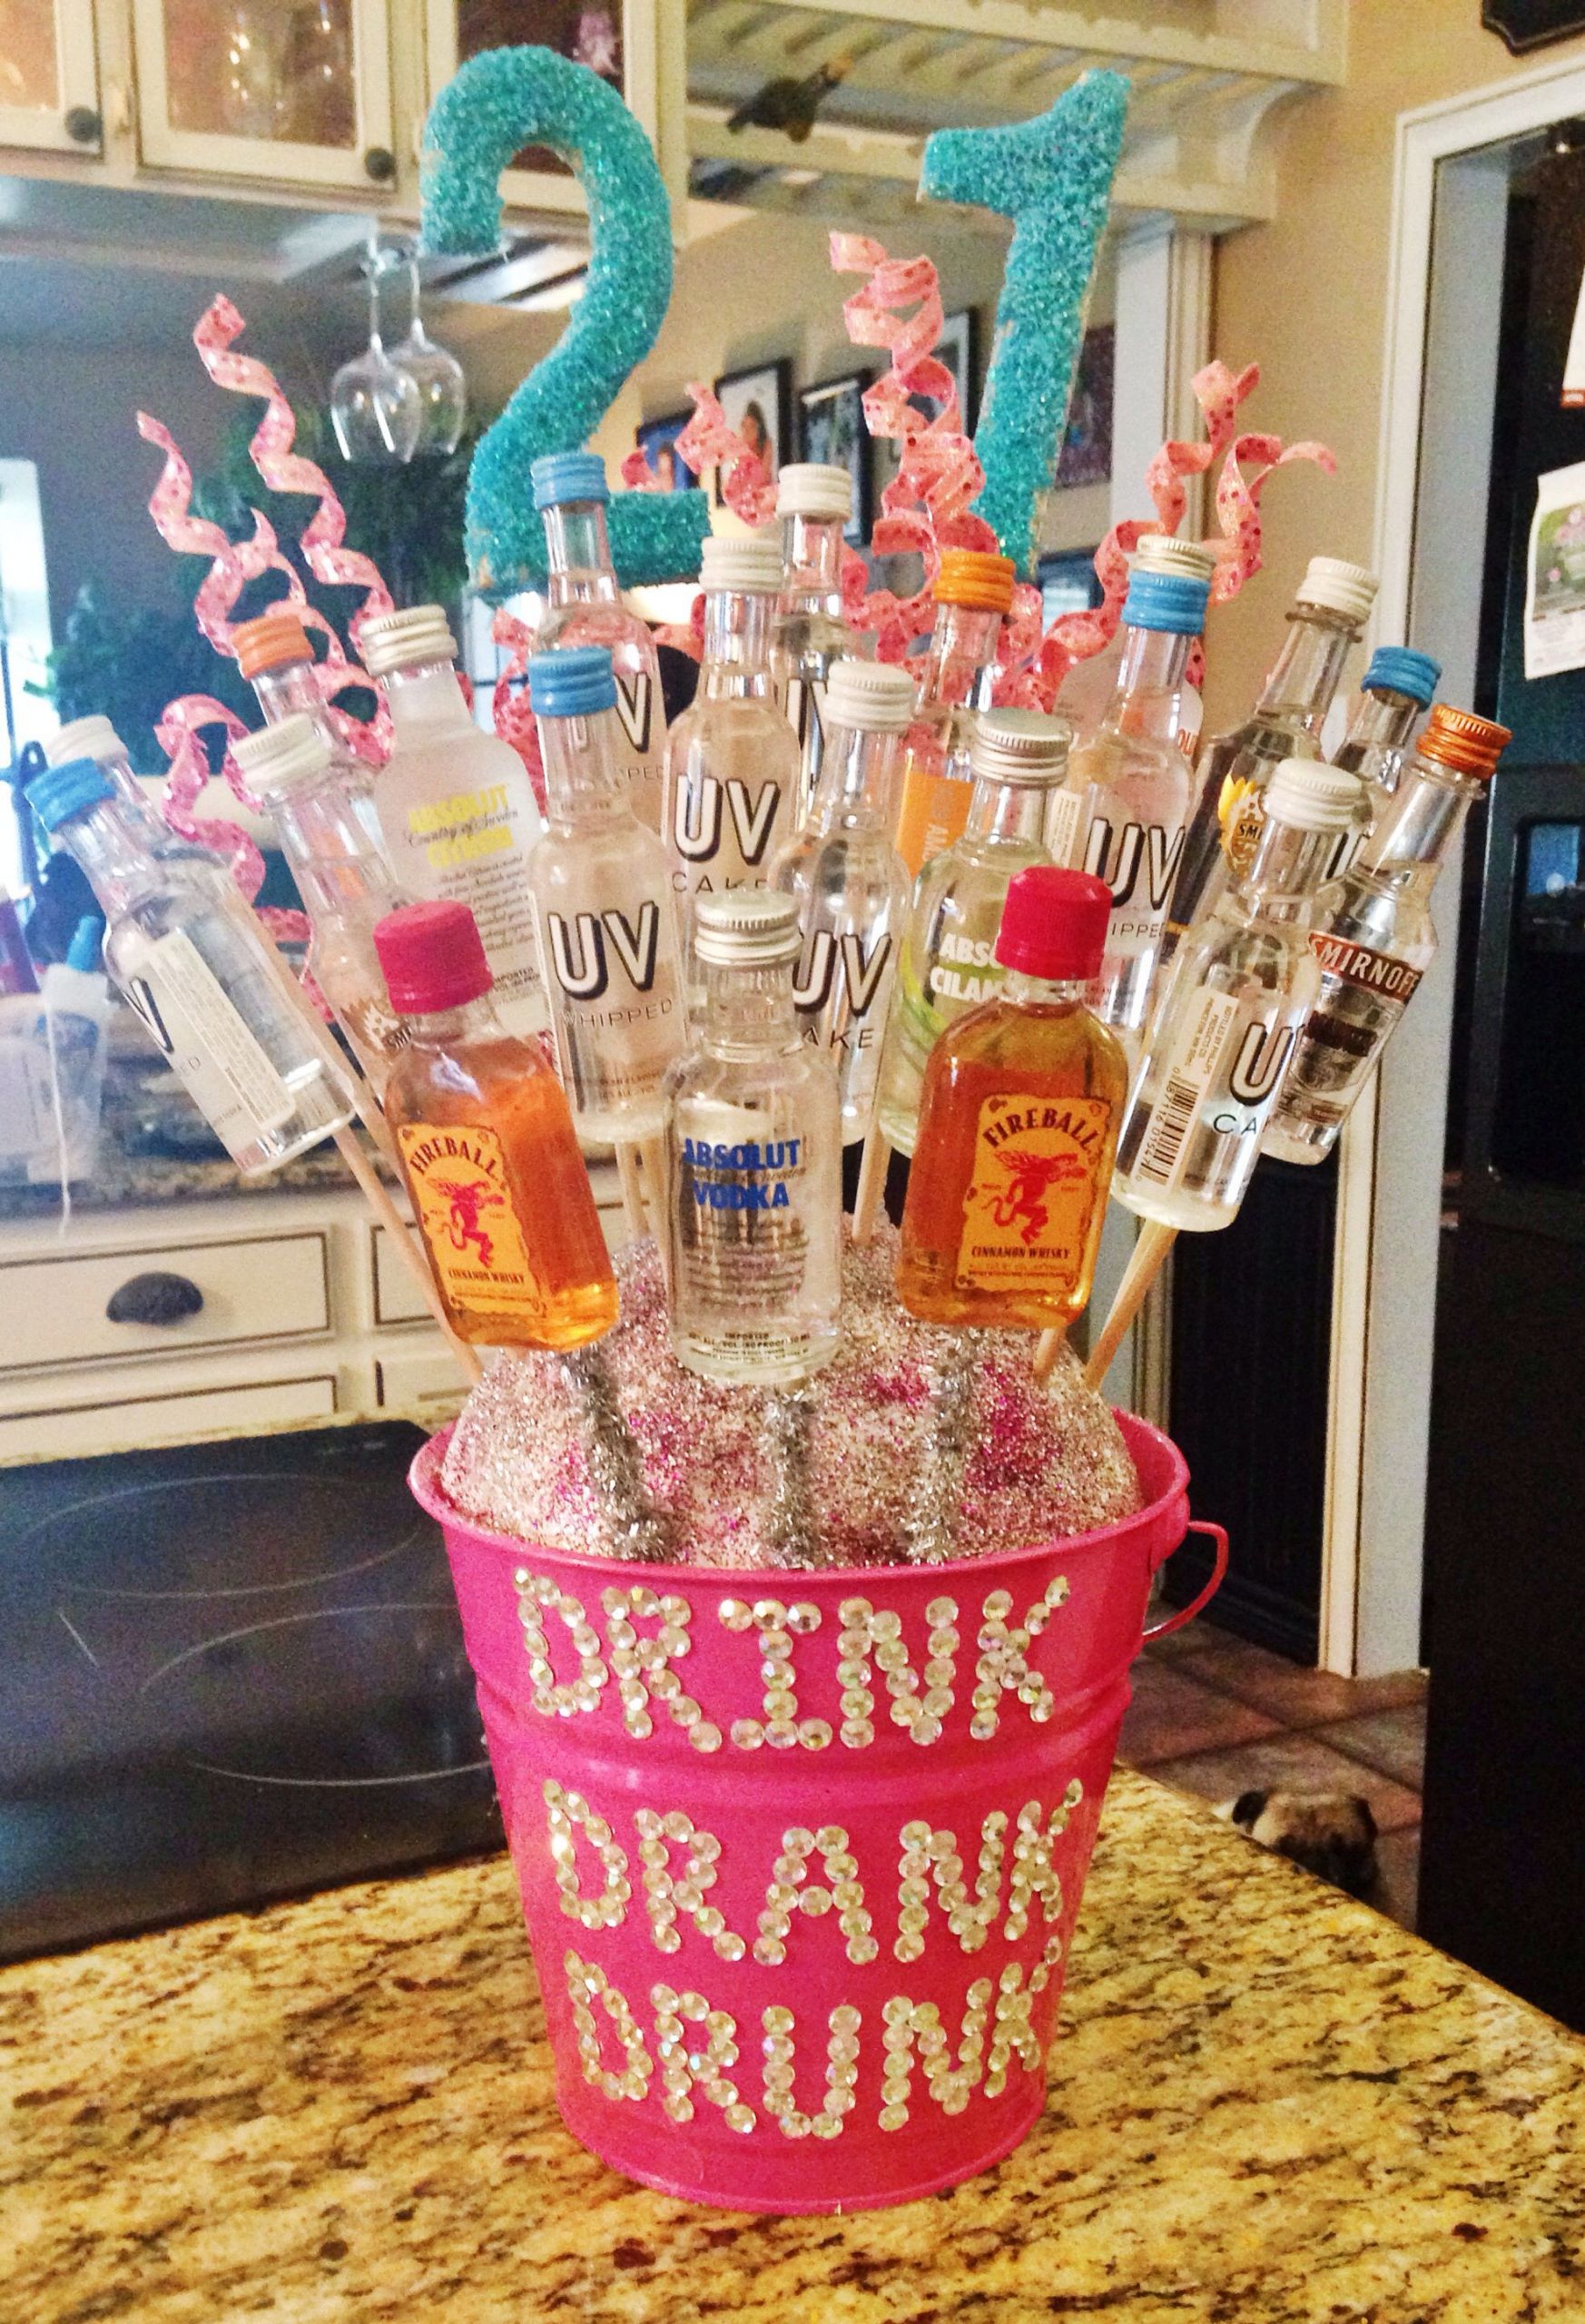 21st Birthday Gift
 21st alcohol bouquet I made for my best friend